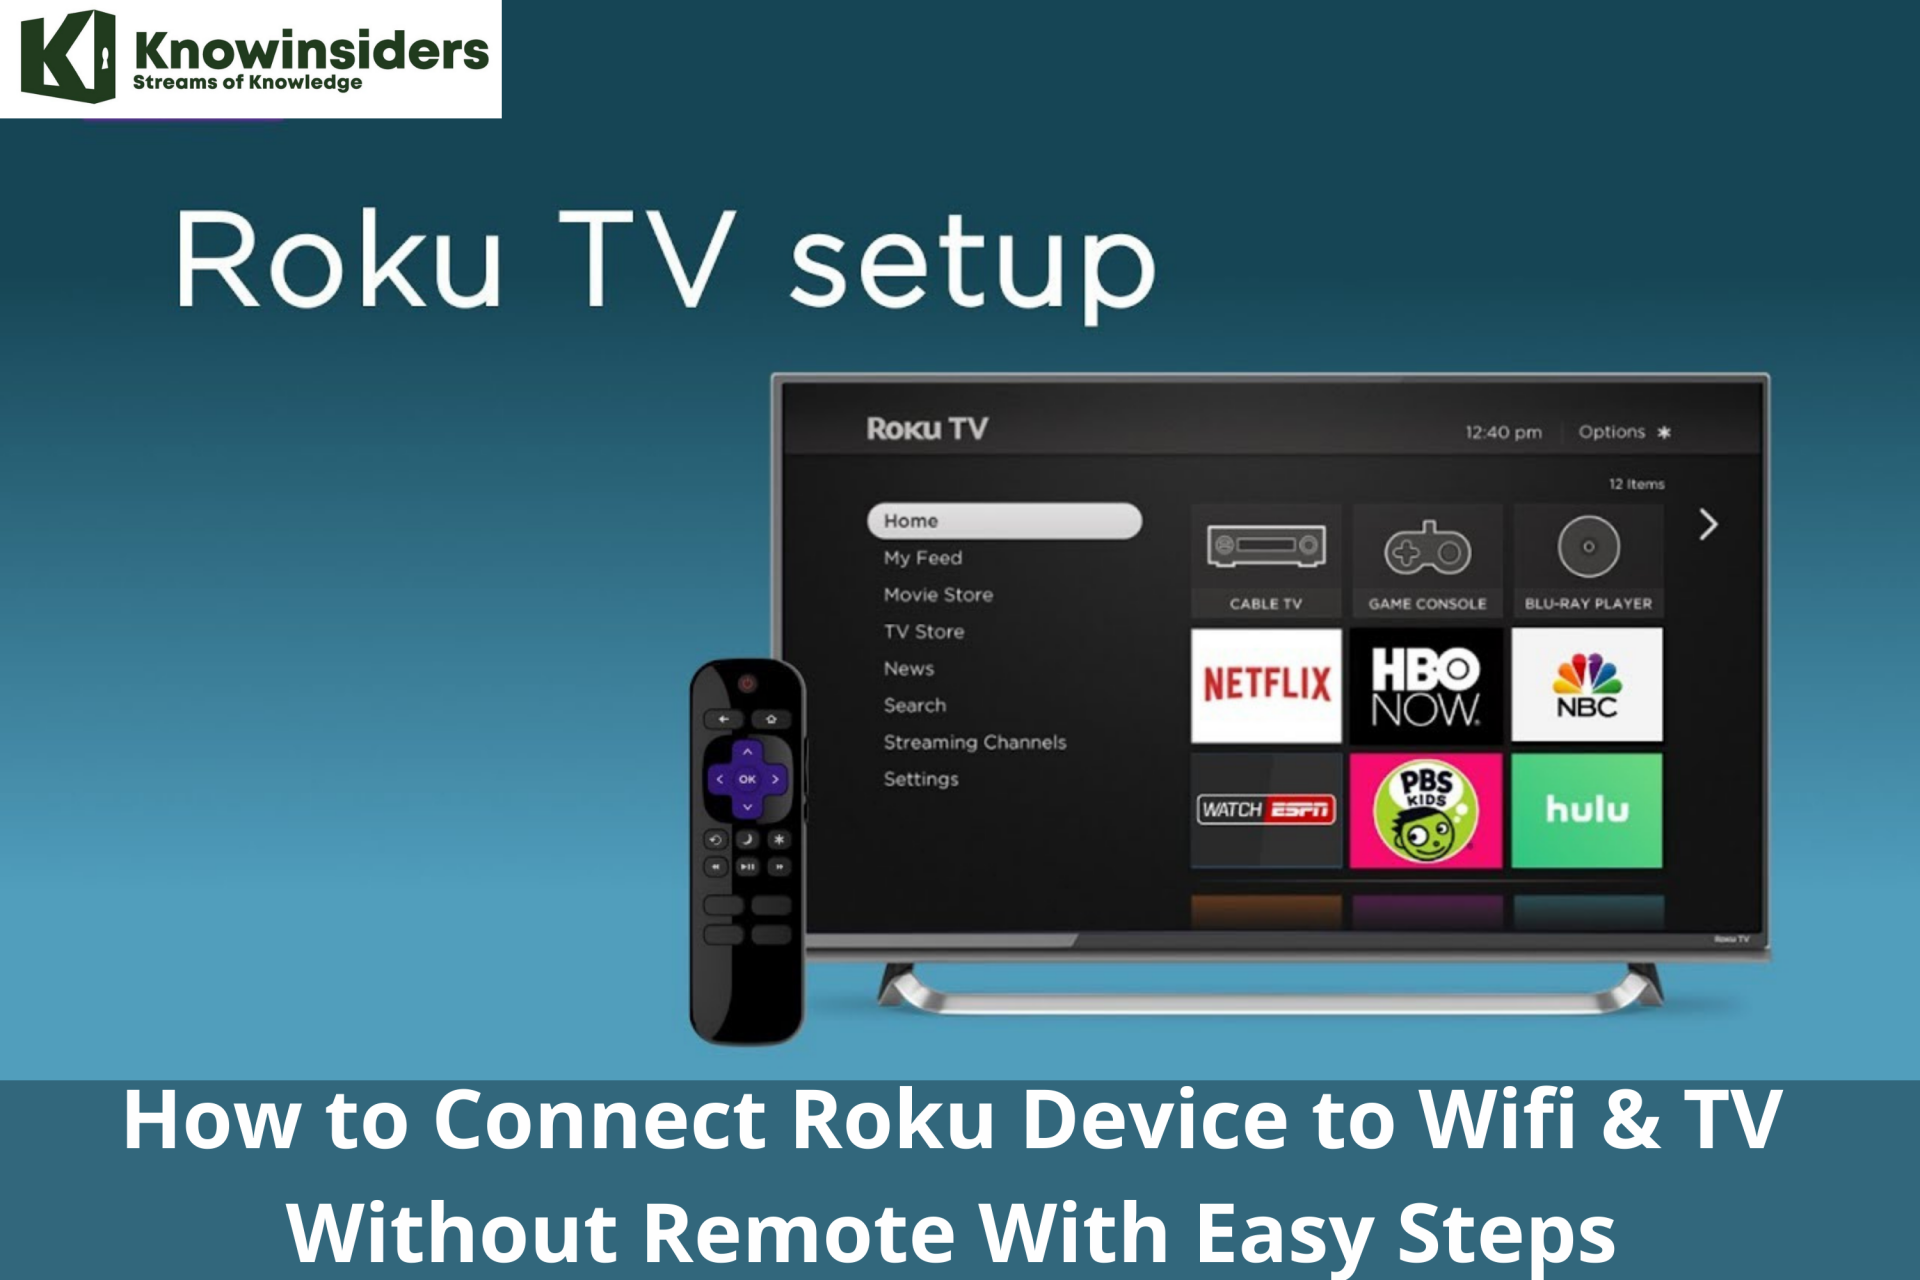 How to Connect Roku Device to Wifi & TV Without Remote With Easy Steps